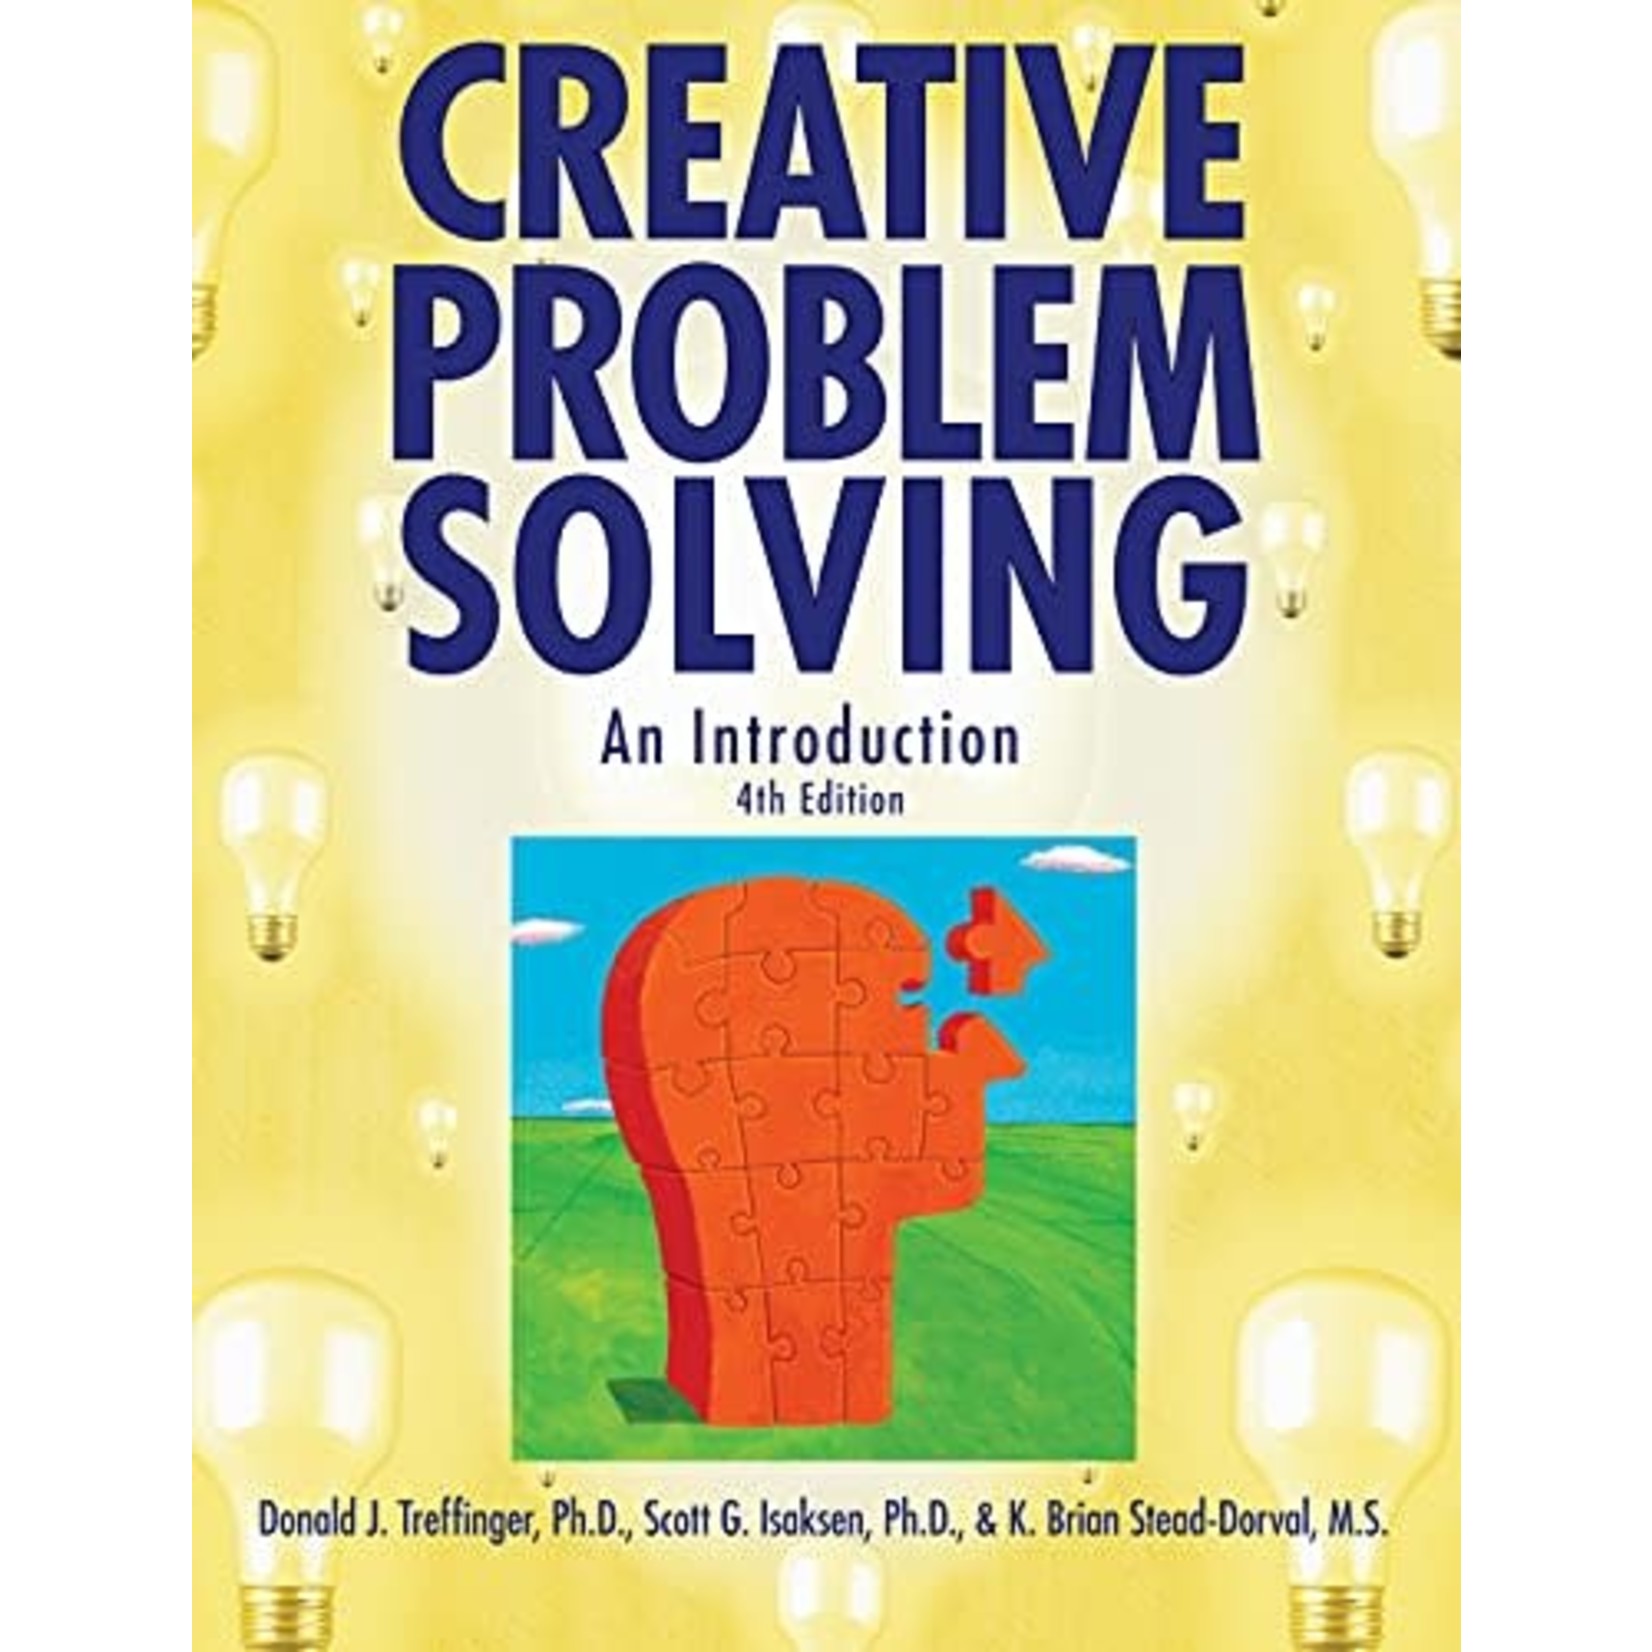 Creative Problem Solving: An Introduction 4th Edition